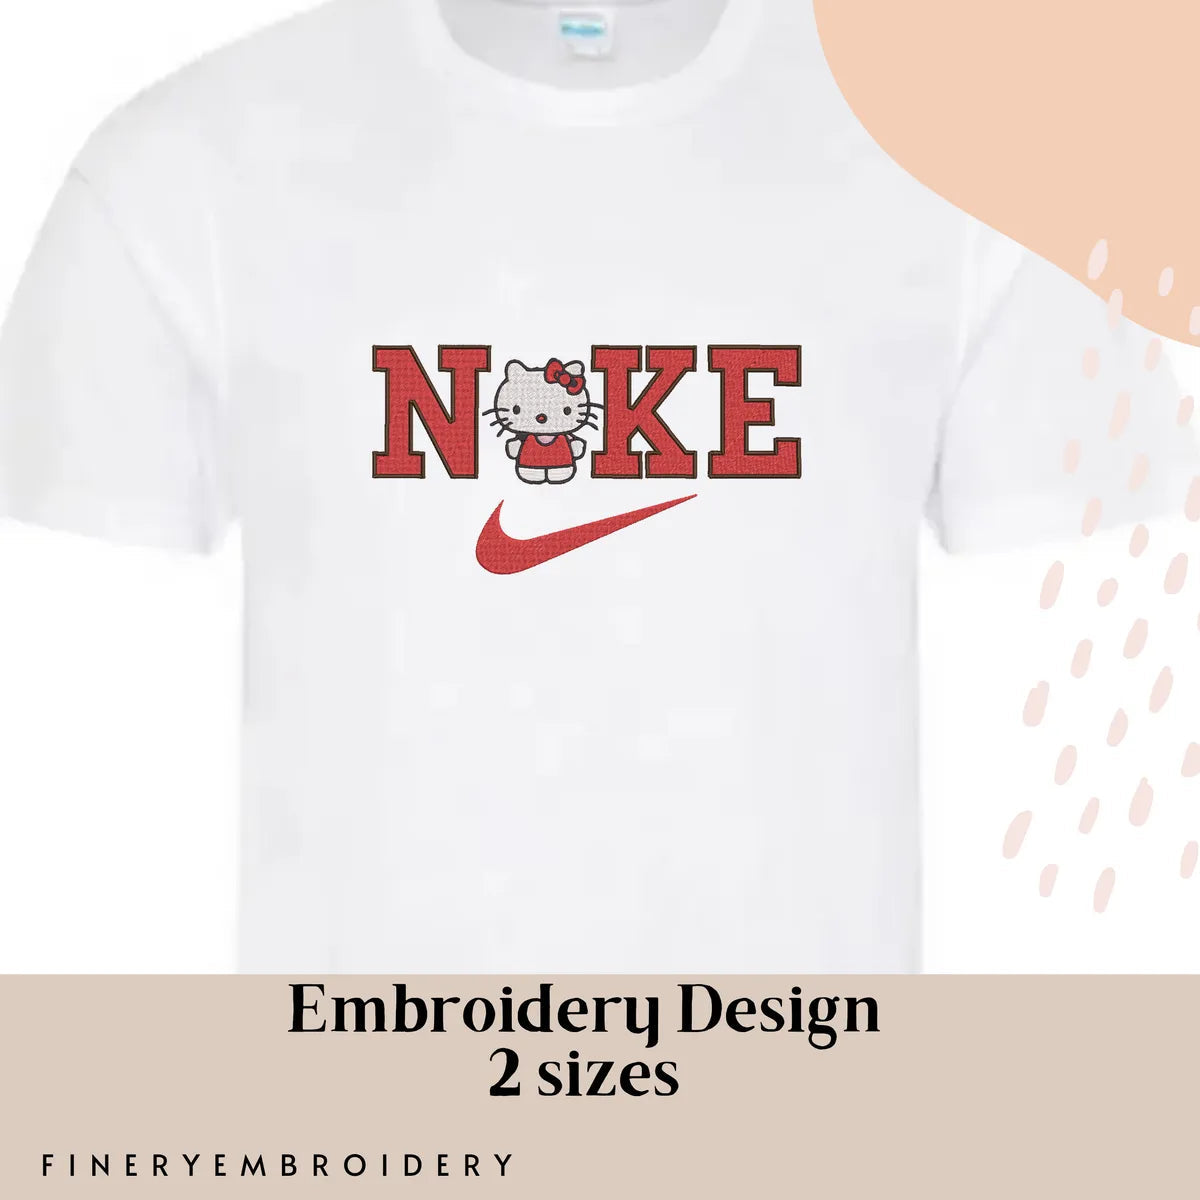 Nike and Hello Kitty 4 - Embroidery Design FineryEmbroidery